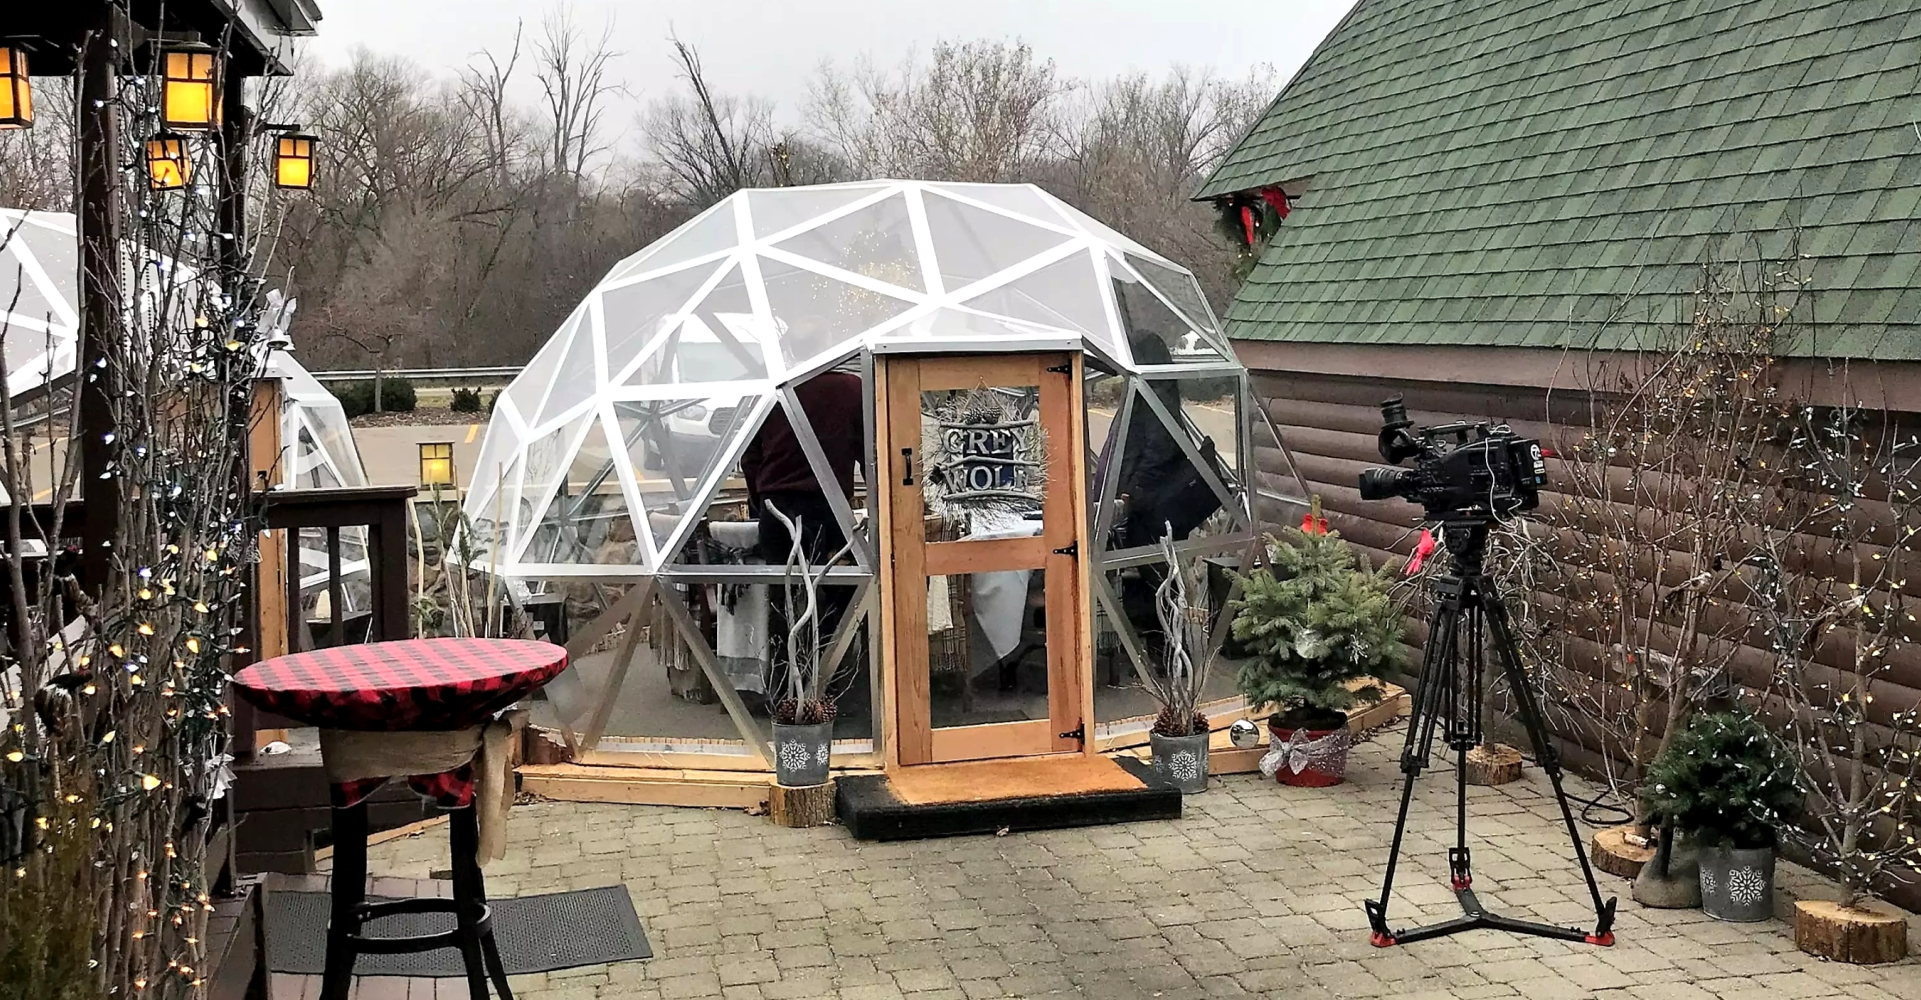 Deadwood Bar and Grill in Northville, Michigan, talks with Syma Chowdhry of WXYZ Channel 7 in Detroit about the restaurant’s newest attraction: heated igloos.